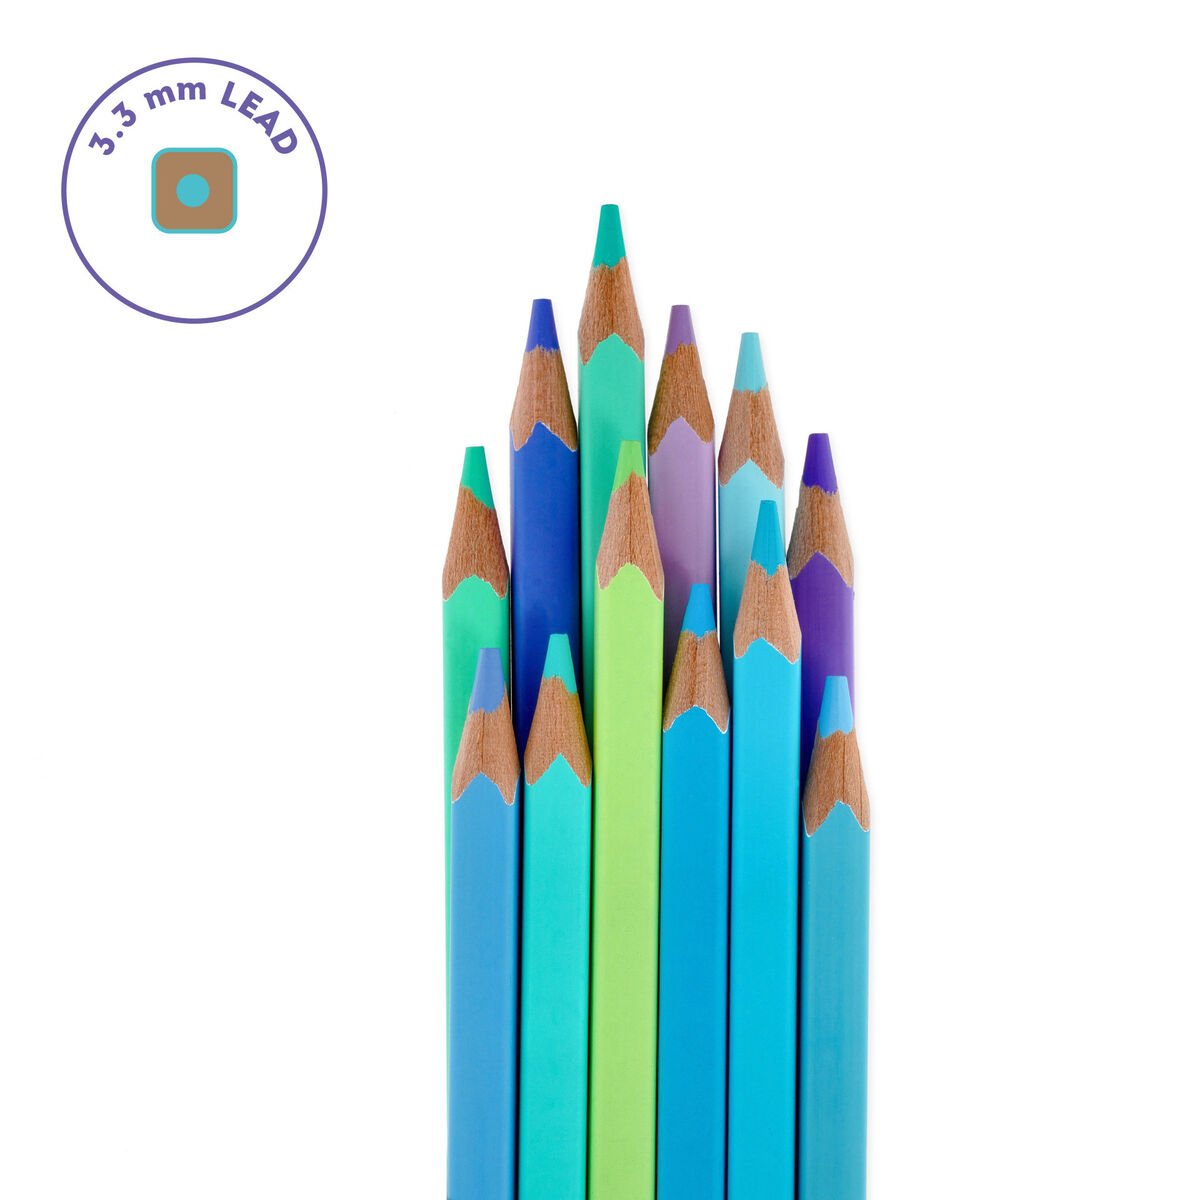 Set of 12 Colouring Pencils - Live Colourfully, , zoo